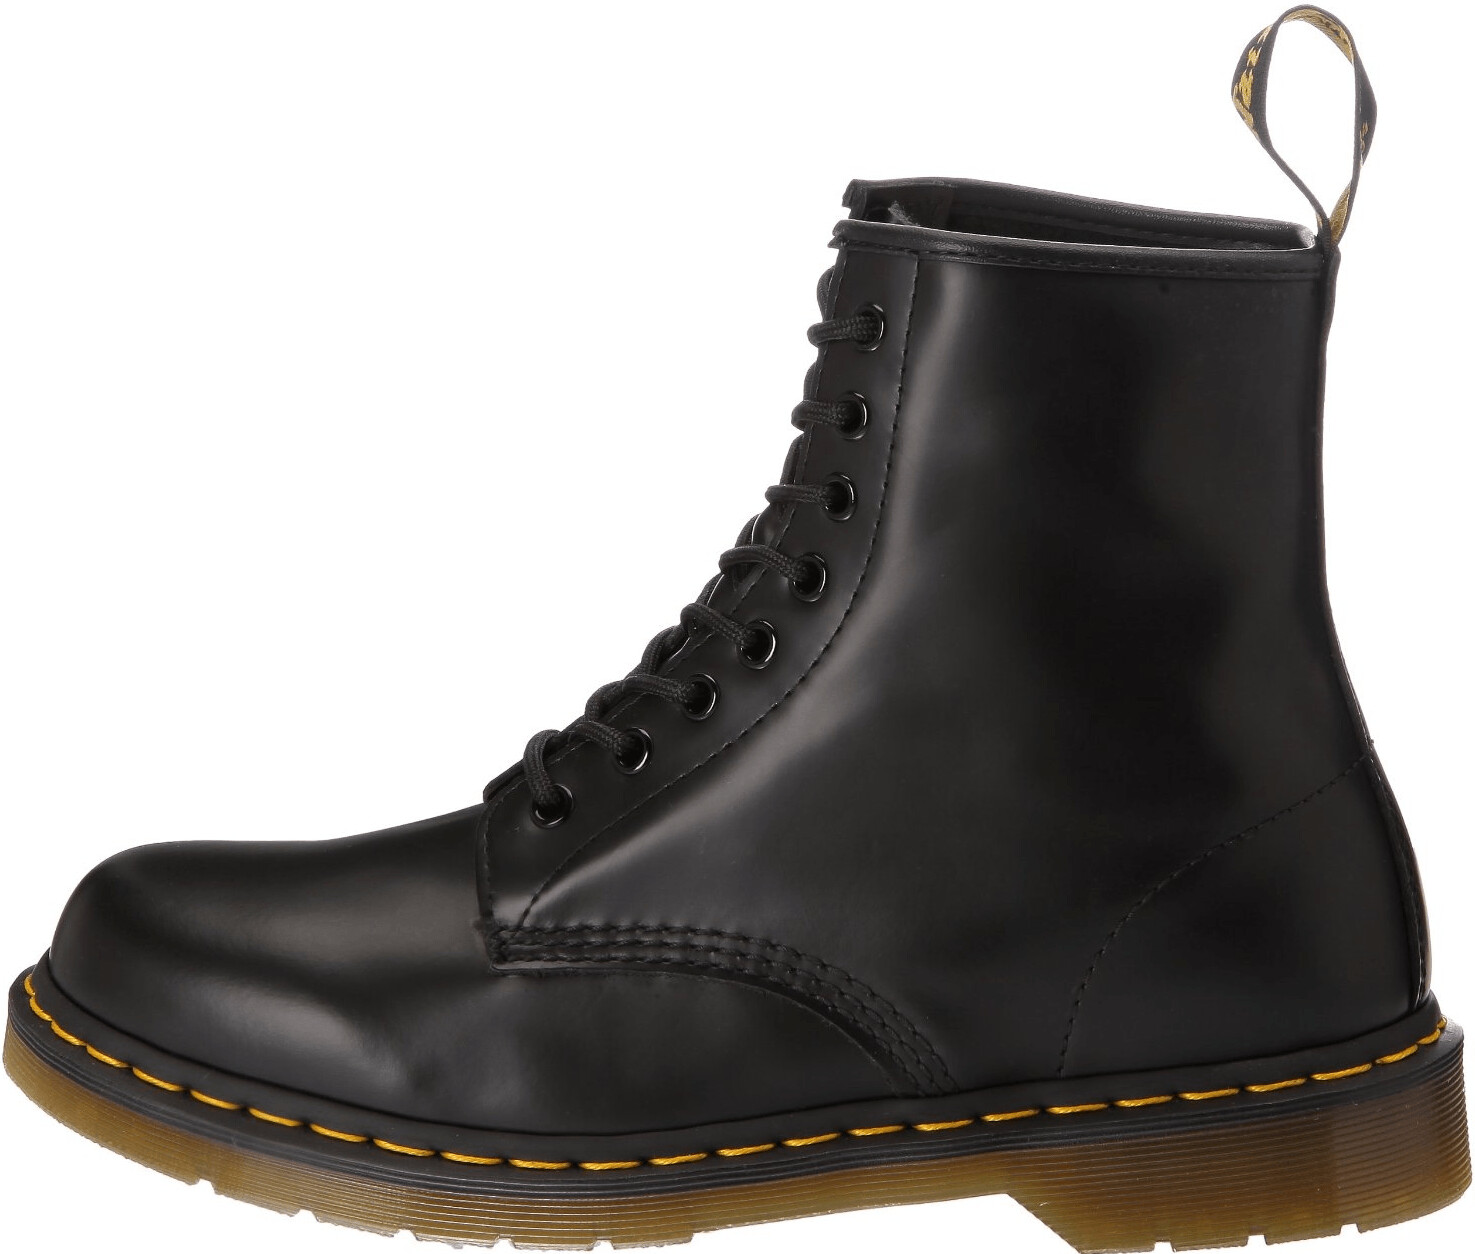 Buy Dr Martens 1460 From 99 Today Best Deals On Idealo Co Uk